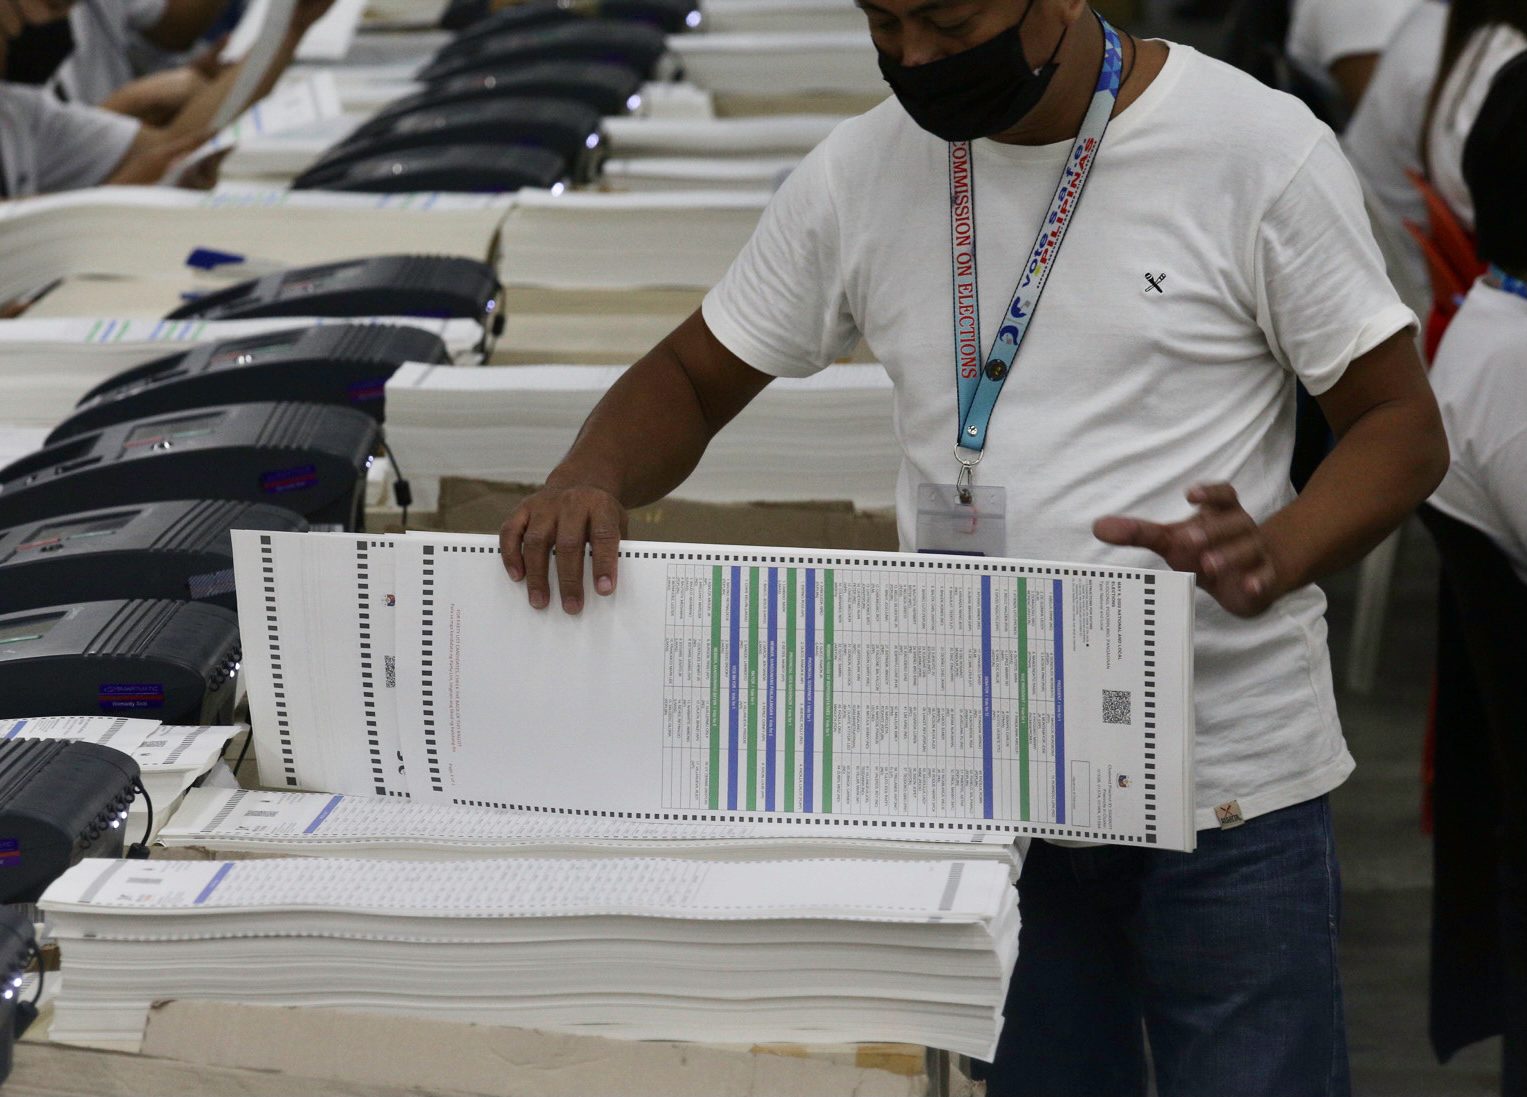 Comelec corrects figures, says only 105,000 ballots defective, not 5 million